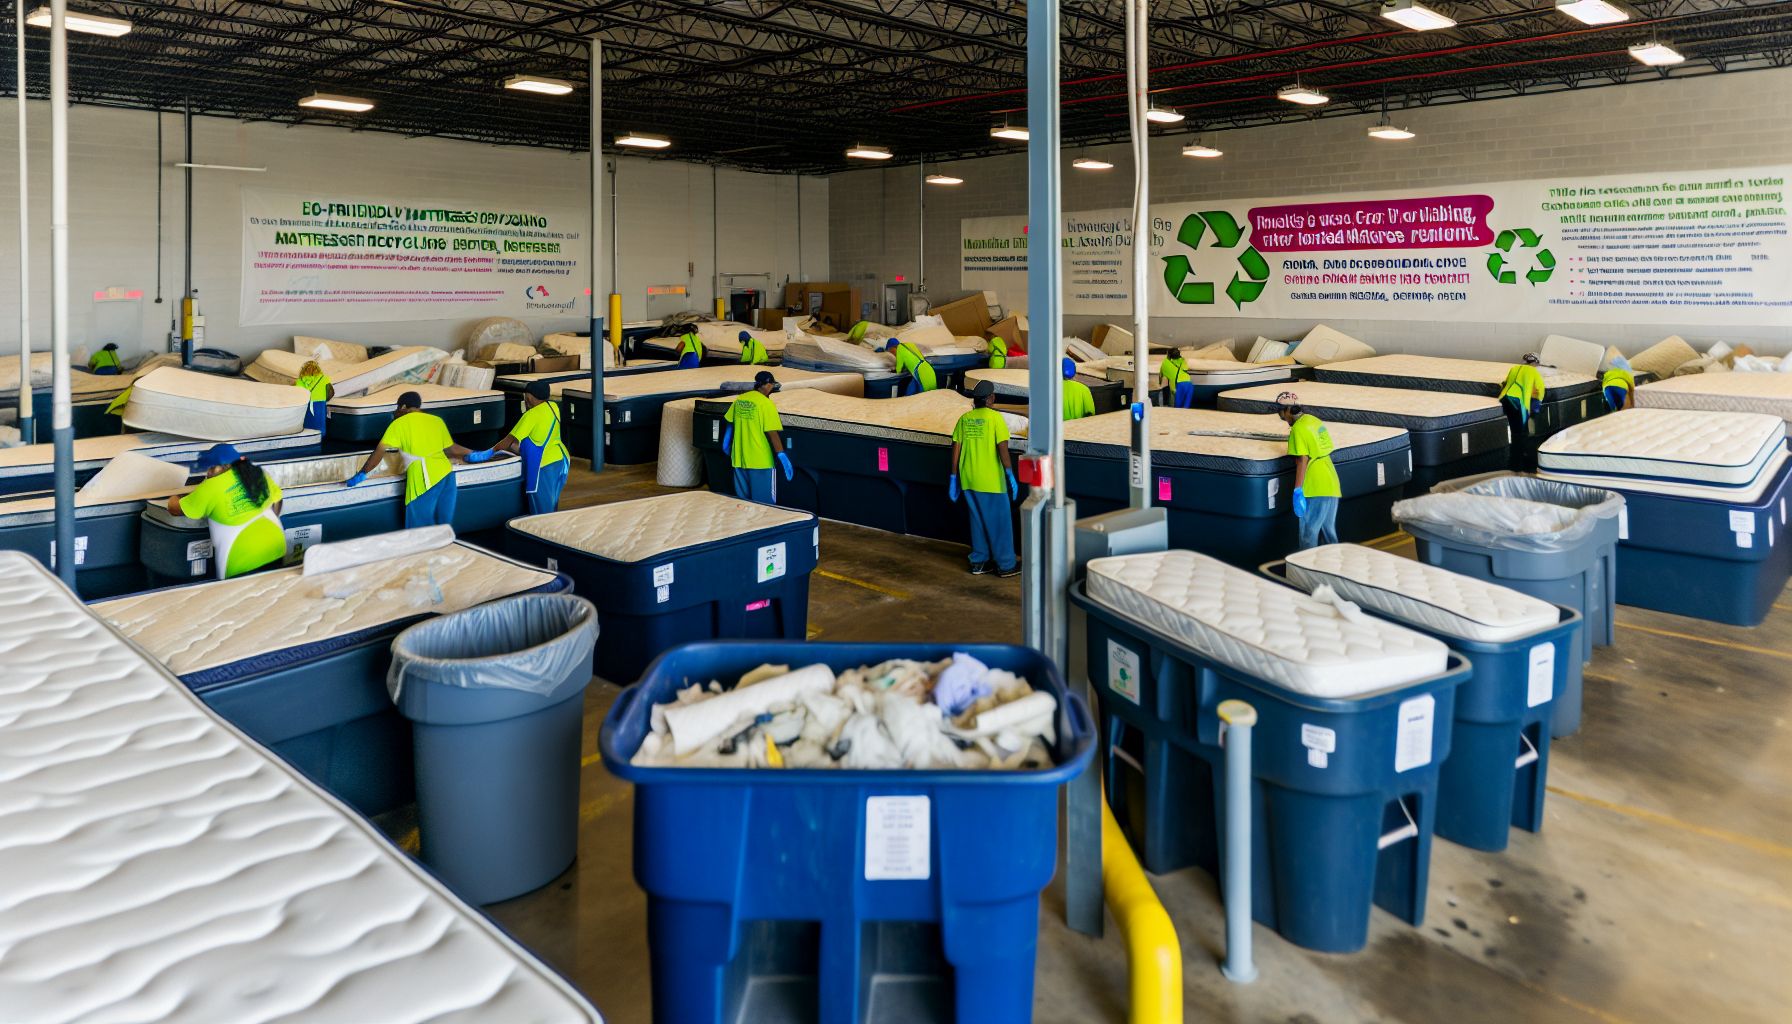 Eco-friendly mattress recycling center in Cedar Park with labeled bins for different materials